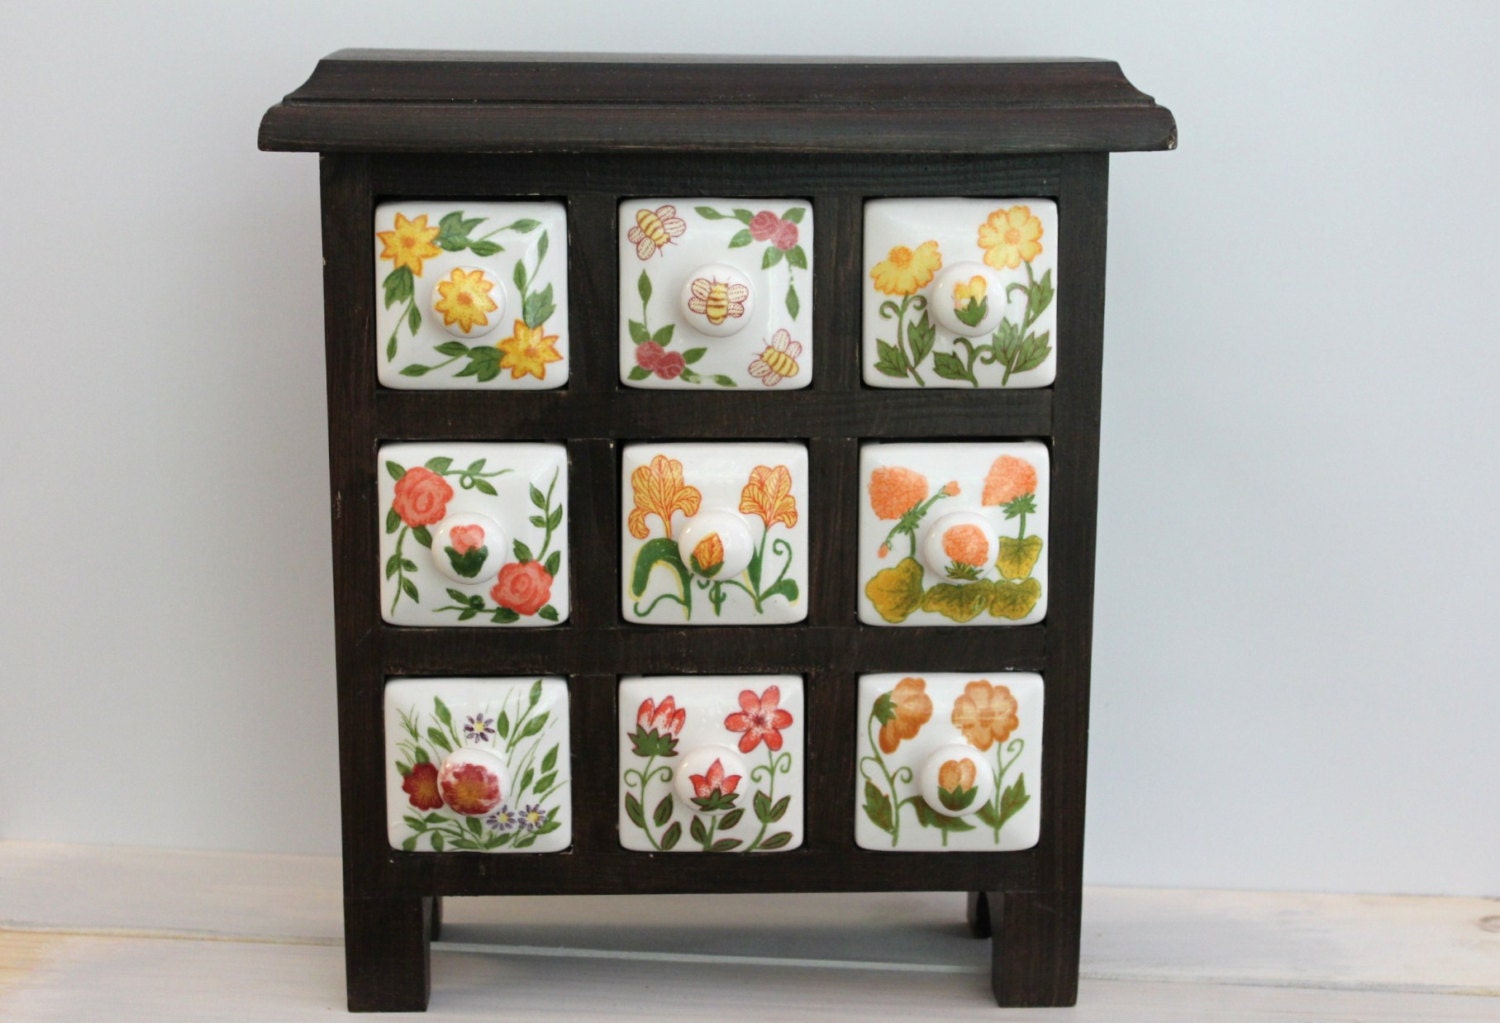 Wooden Spice or Tea Cabinet with 9 ceramic drawers